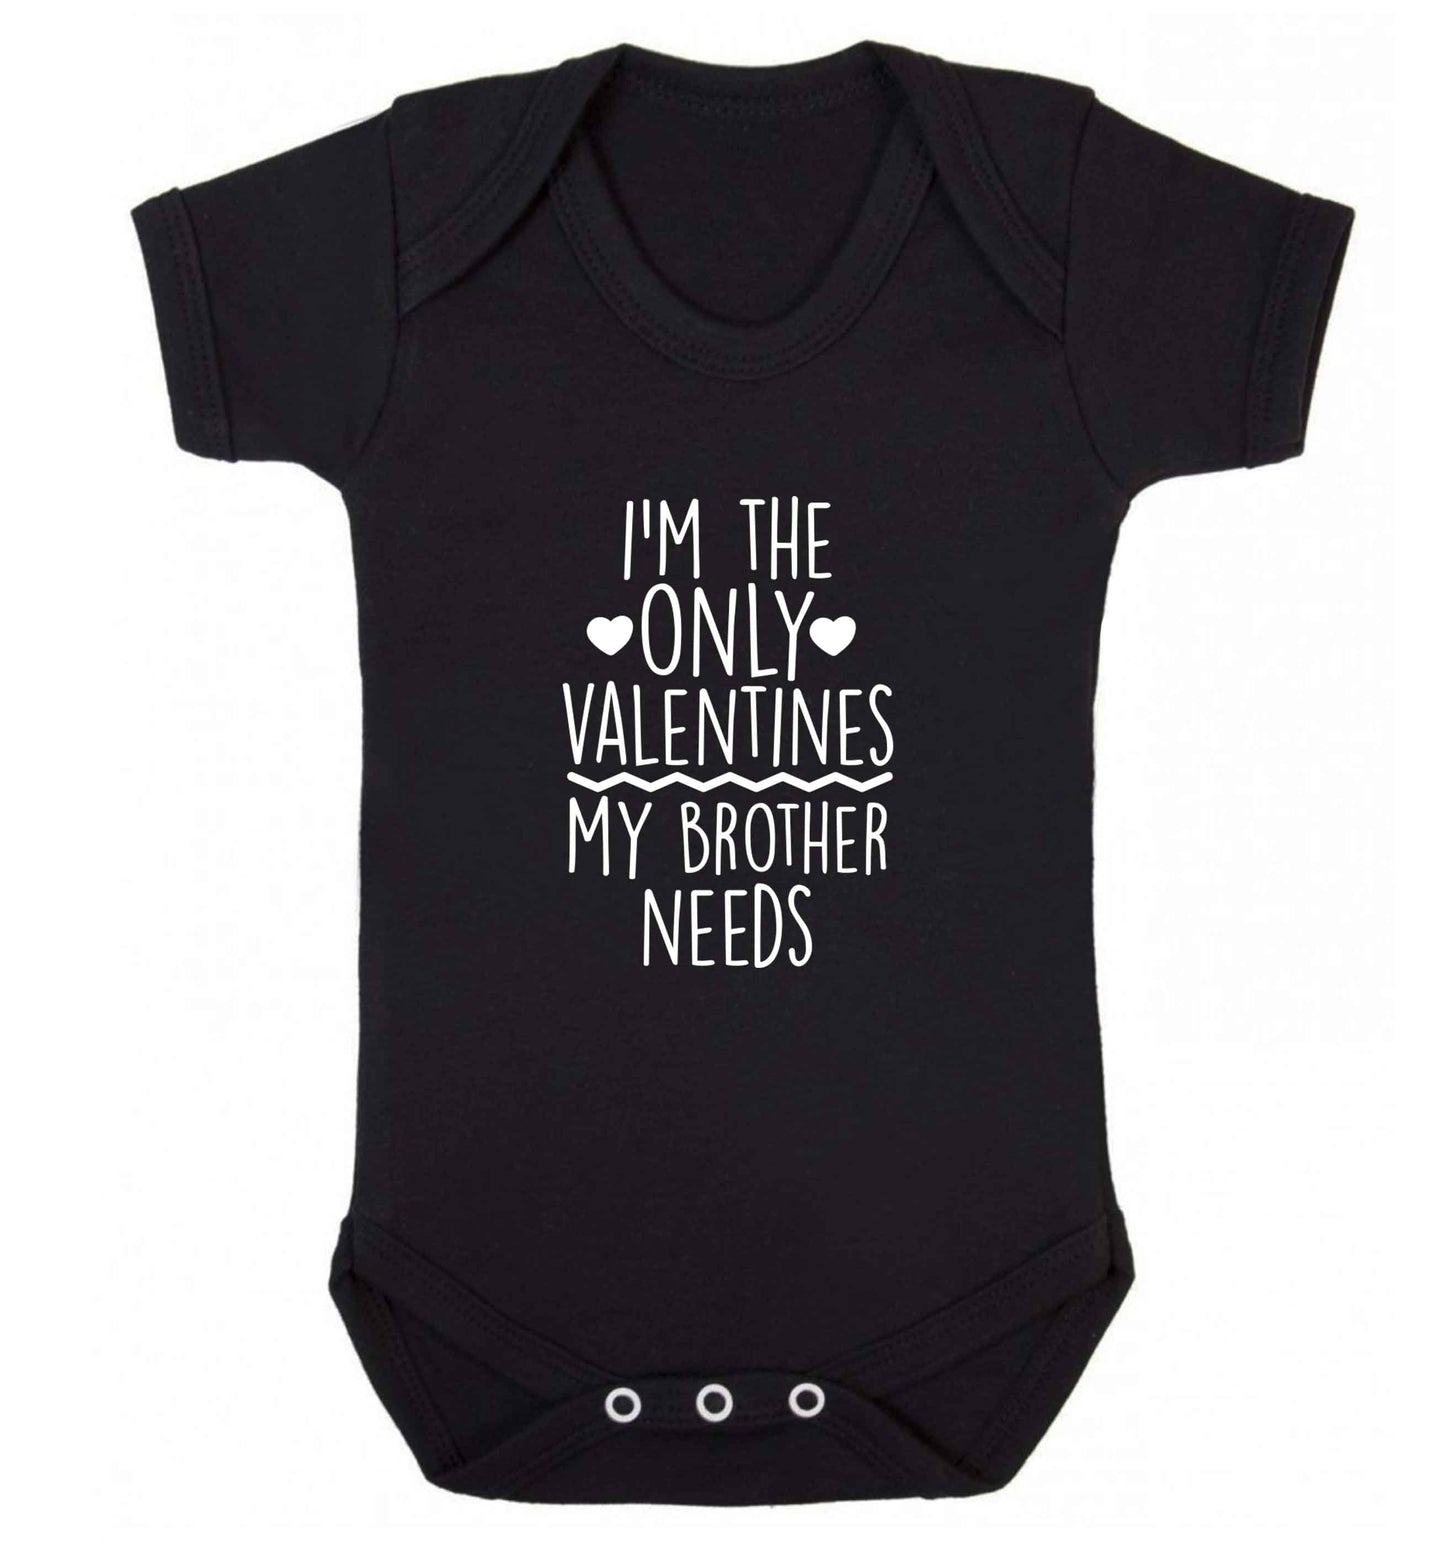 I'm the only valentines my brother needs baby vest black 18-24 months